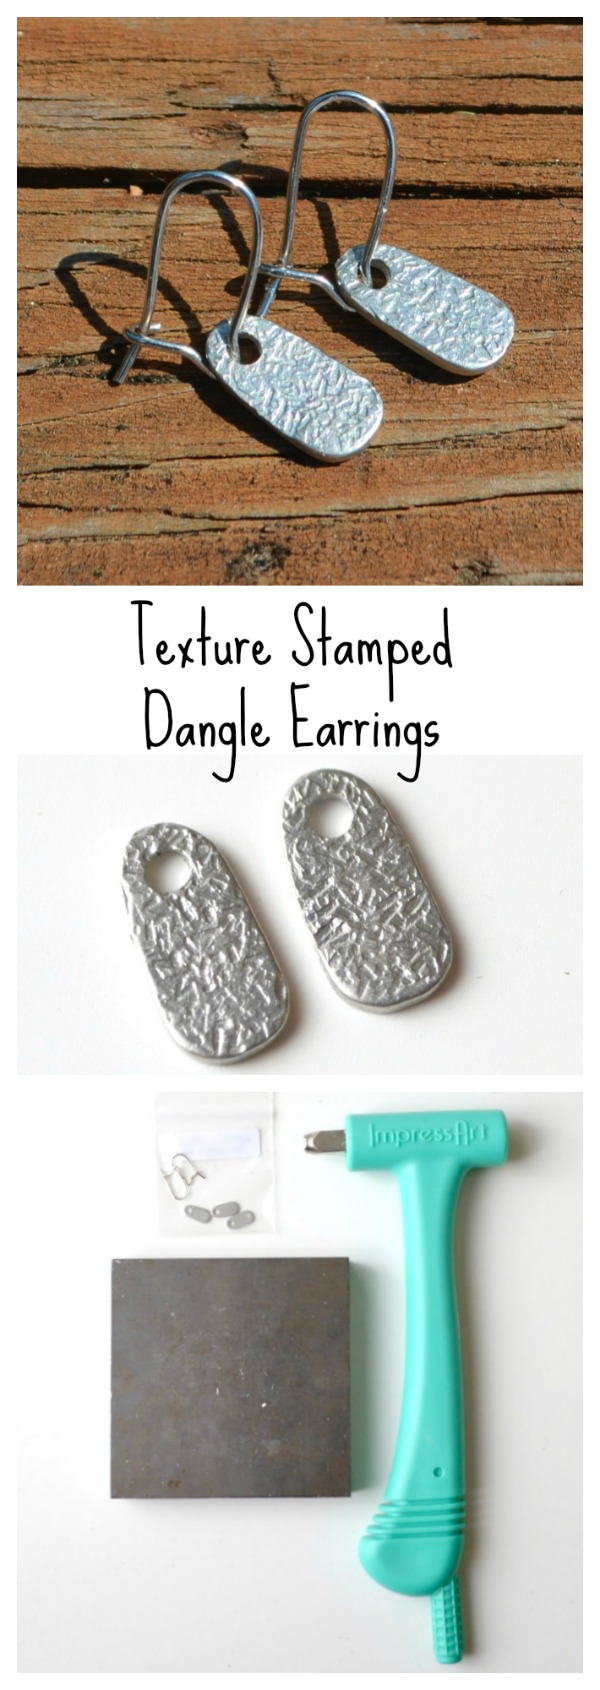 Texture Stamped Dangle Earrings with ImpressArt